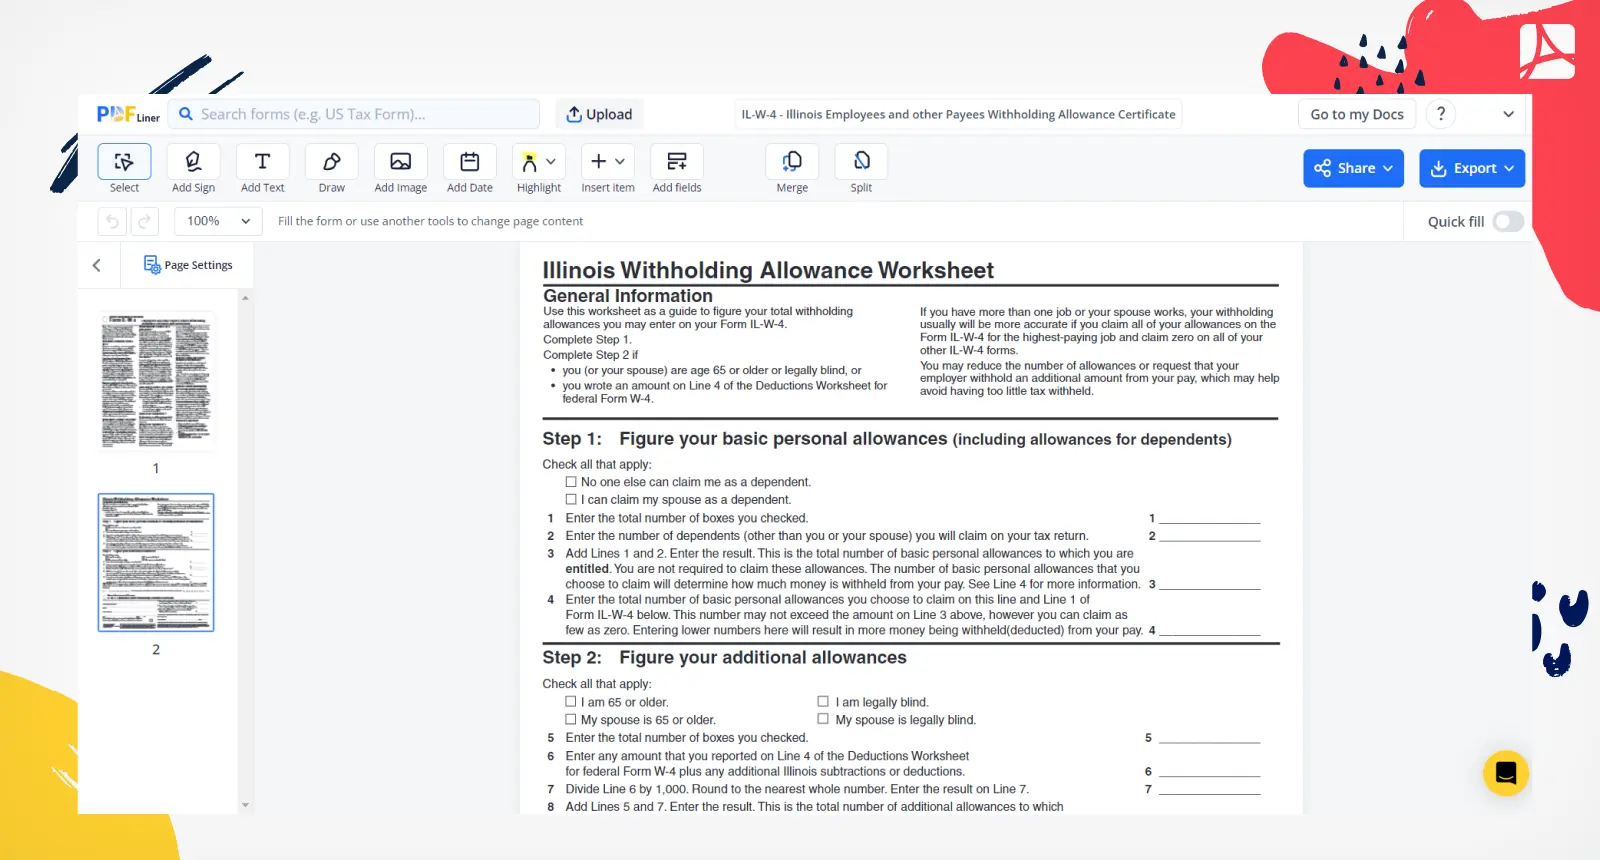 Illinois Employee's and other Payee's Withholding Allowance Certificate Screenshot